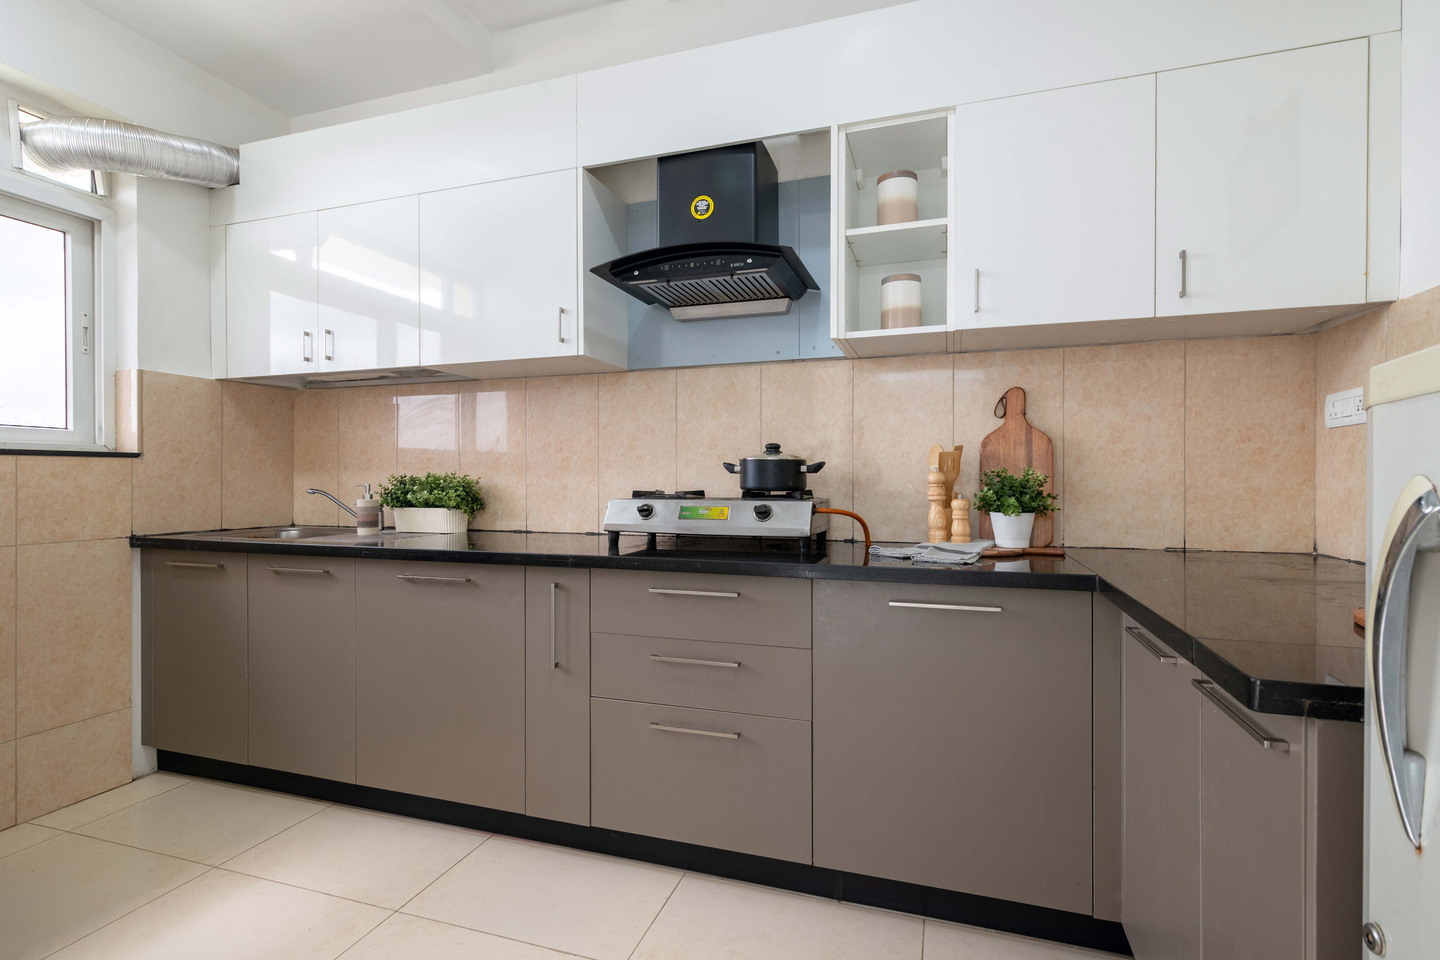 Modern Modular L-Shaped Kitchen Cabinet Design With A Black Countertop